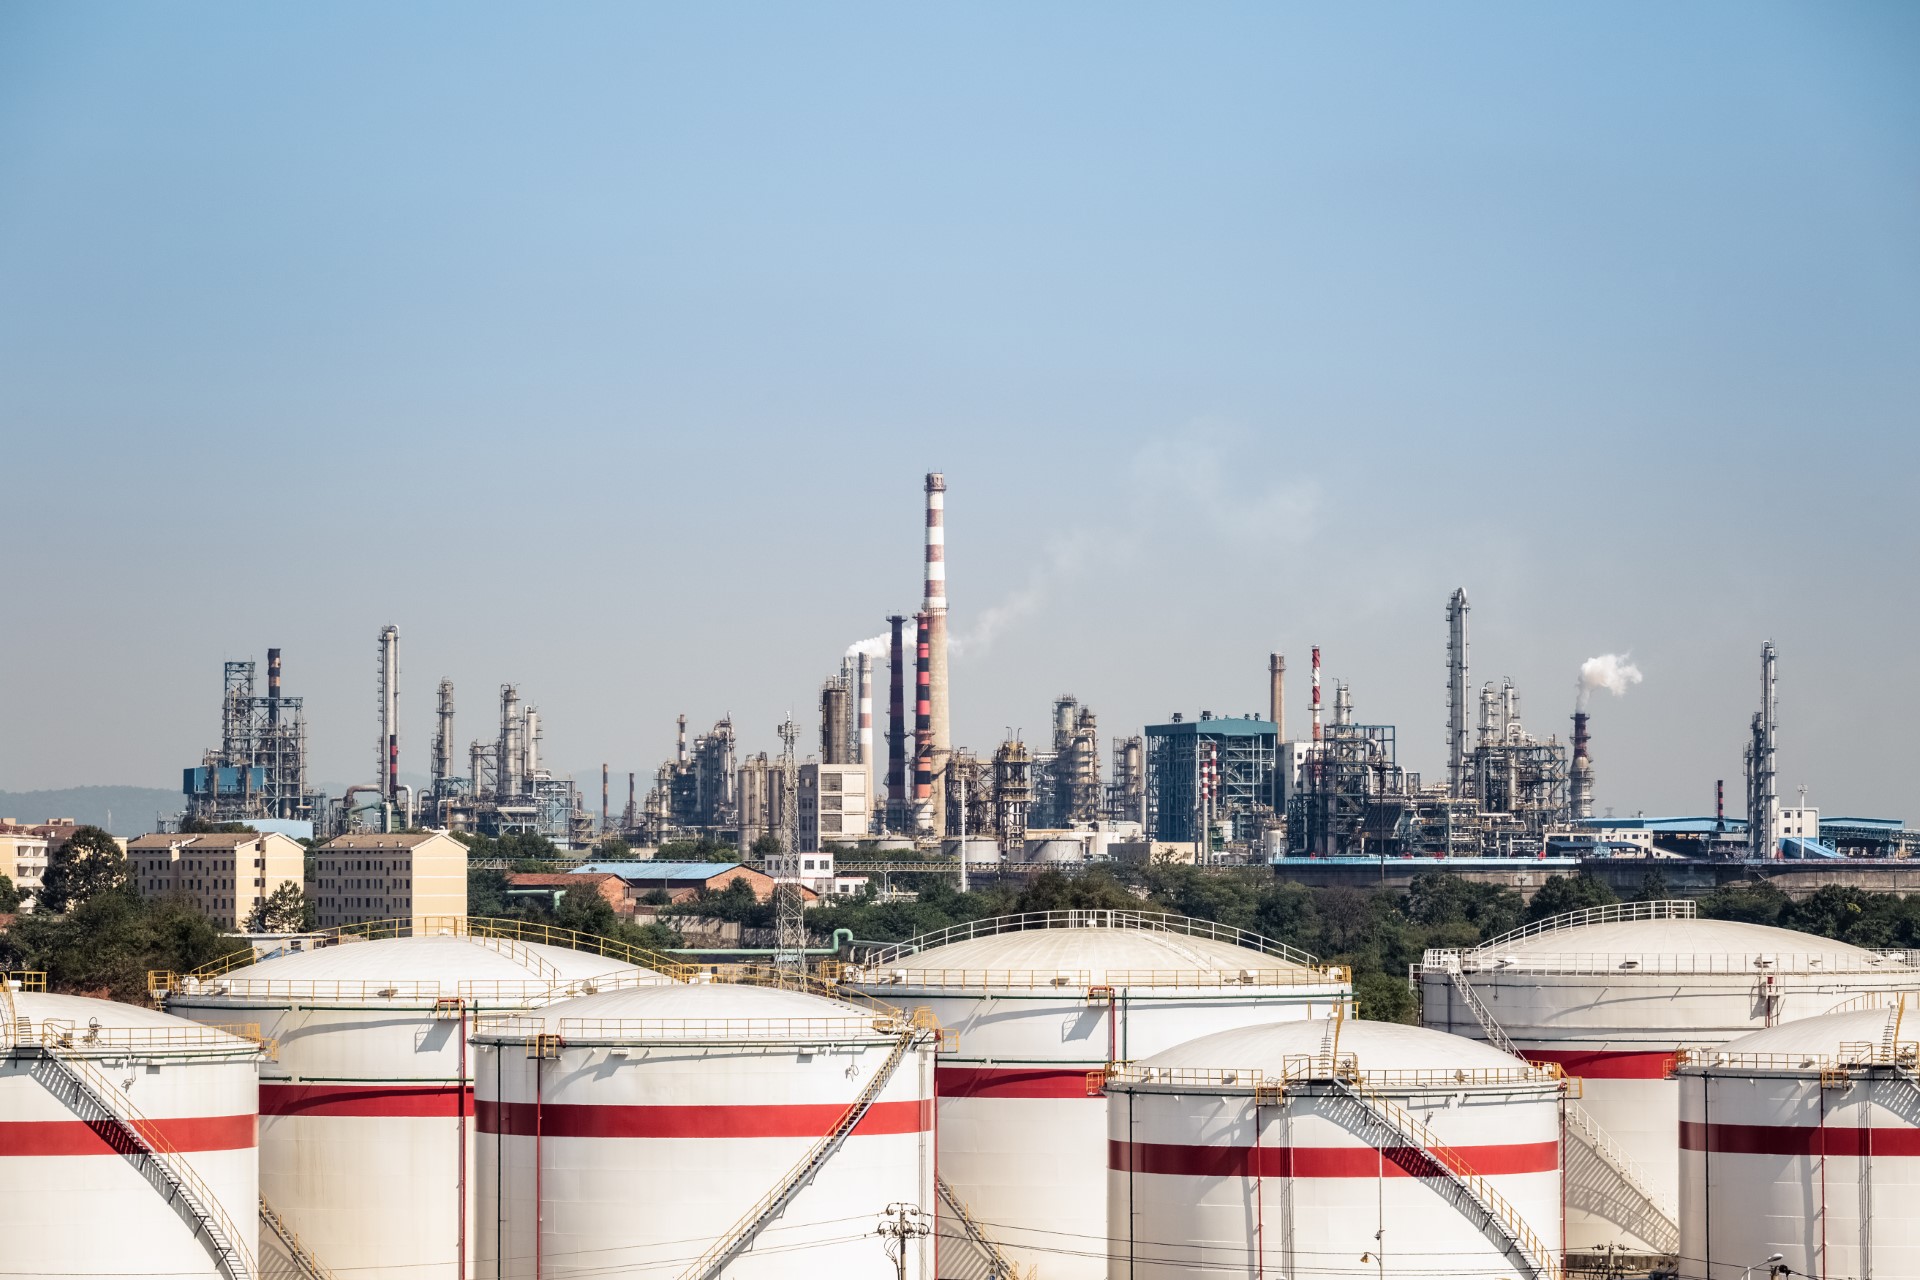 petrochemical-complex-and-storage-tanks-PS2SU5D.jpg